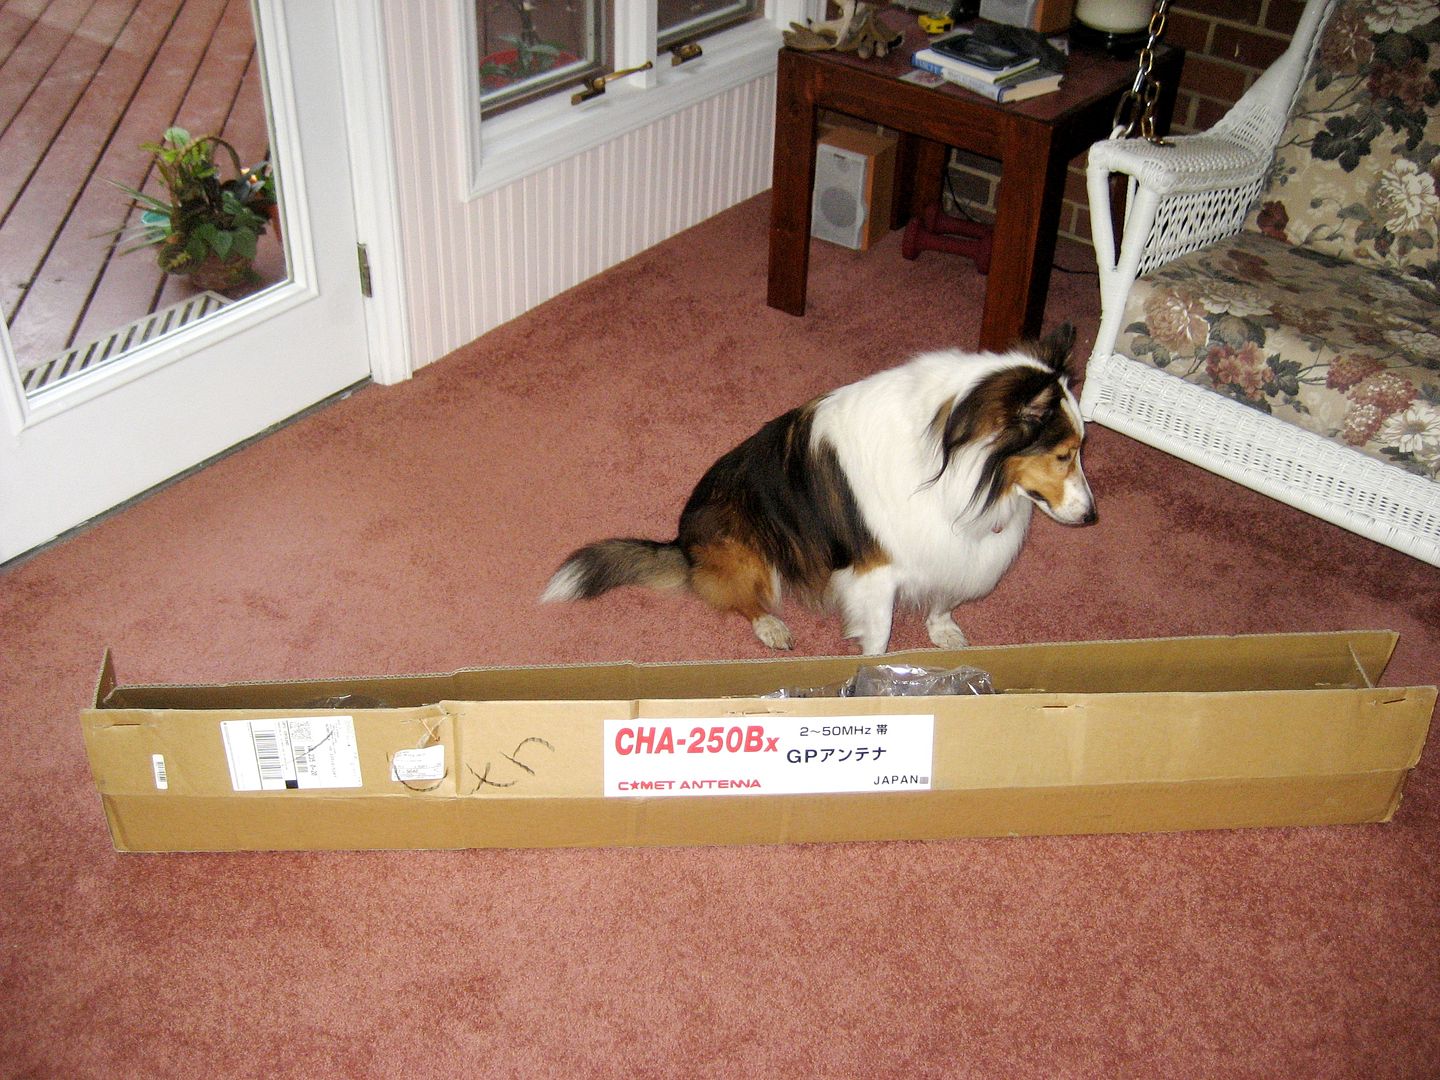 On a more modern note, Teddy the Wonder Dog examines the new Comet CHA-250Bx antenna that arrived Friday afternoon. Shes puzzled by the size of the resistor at the end of this 23 vertical antenna.